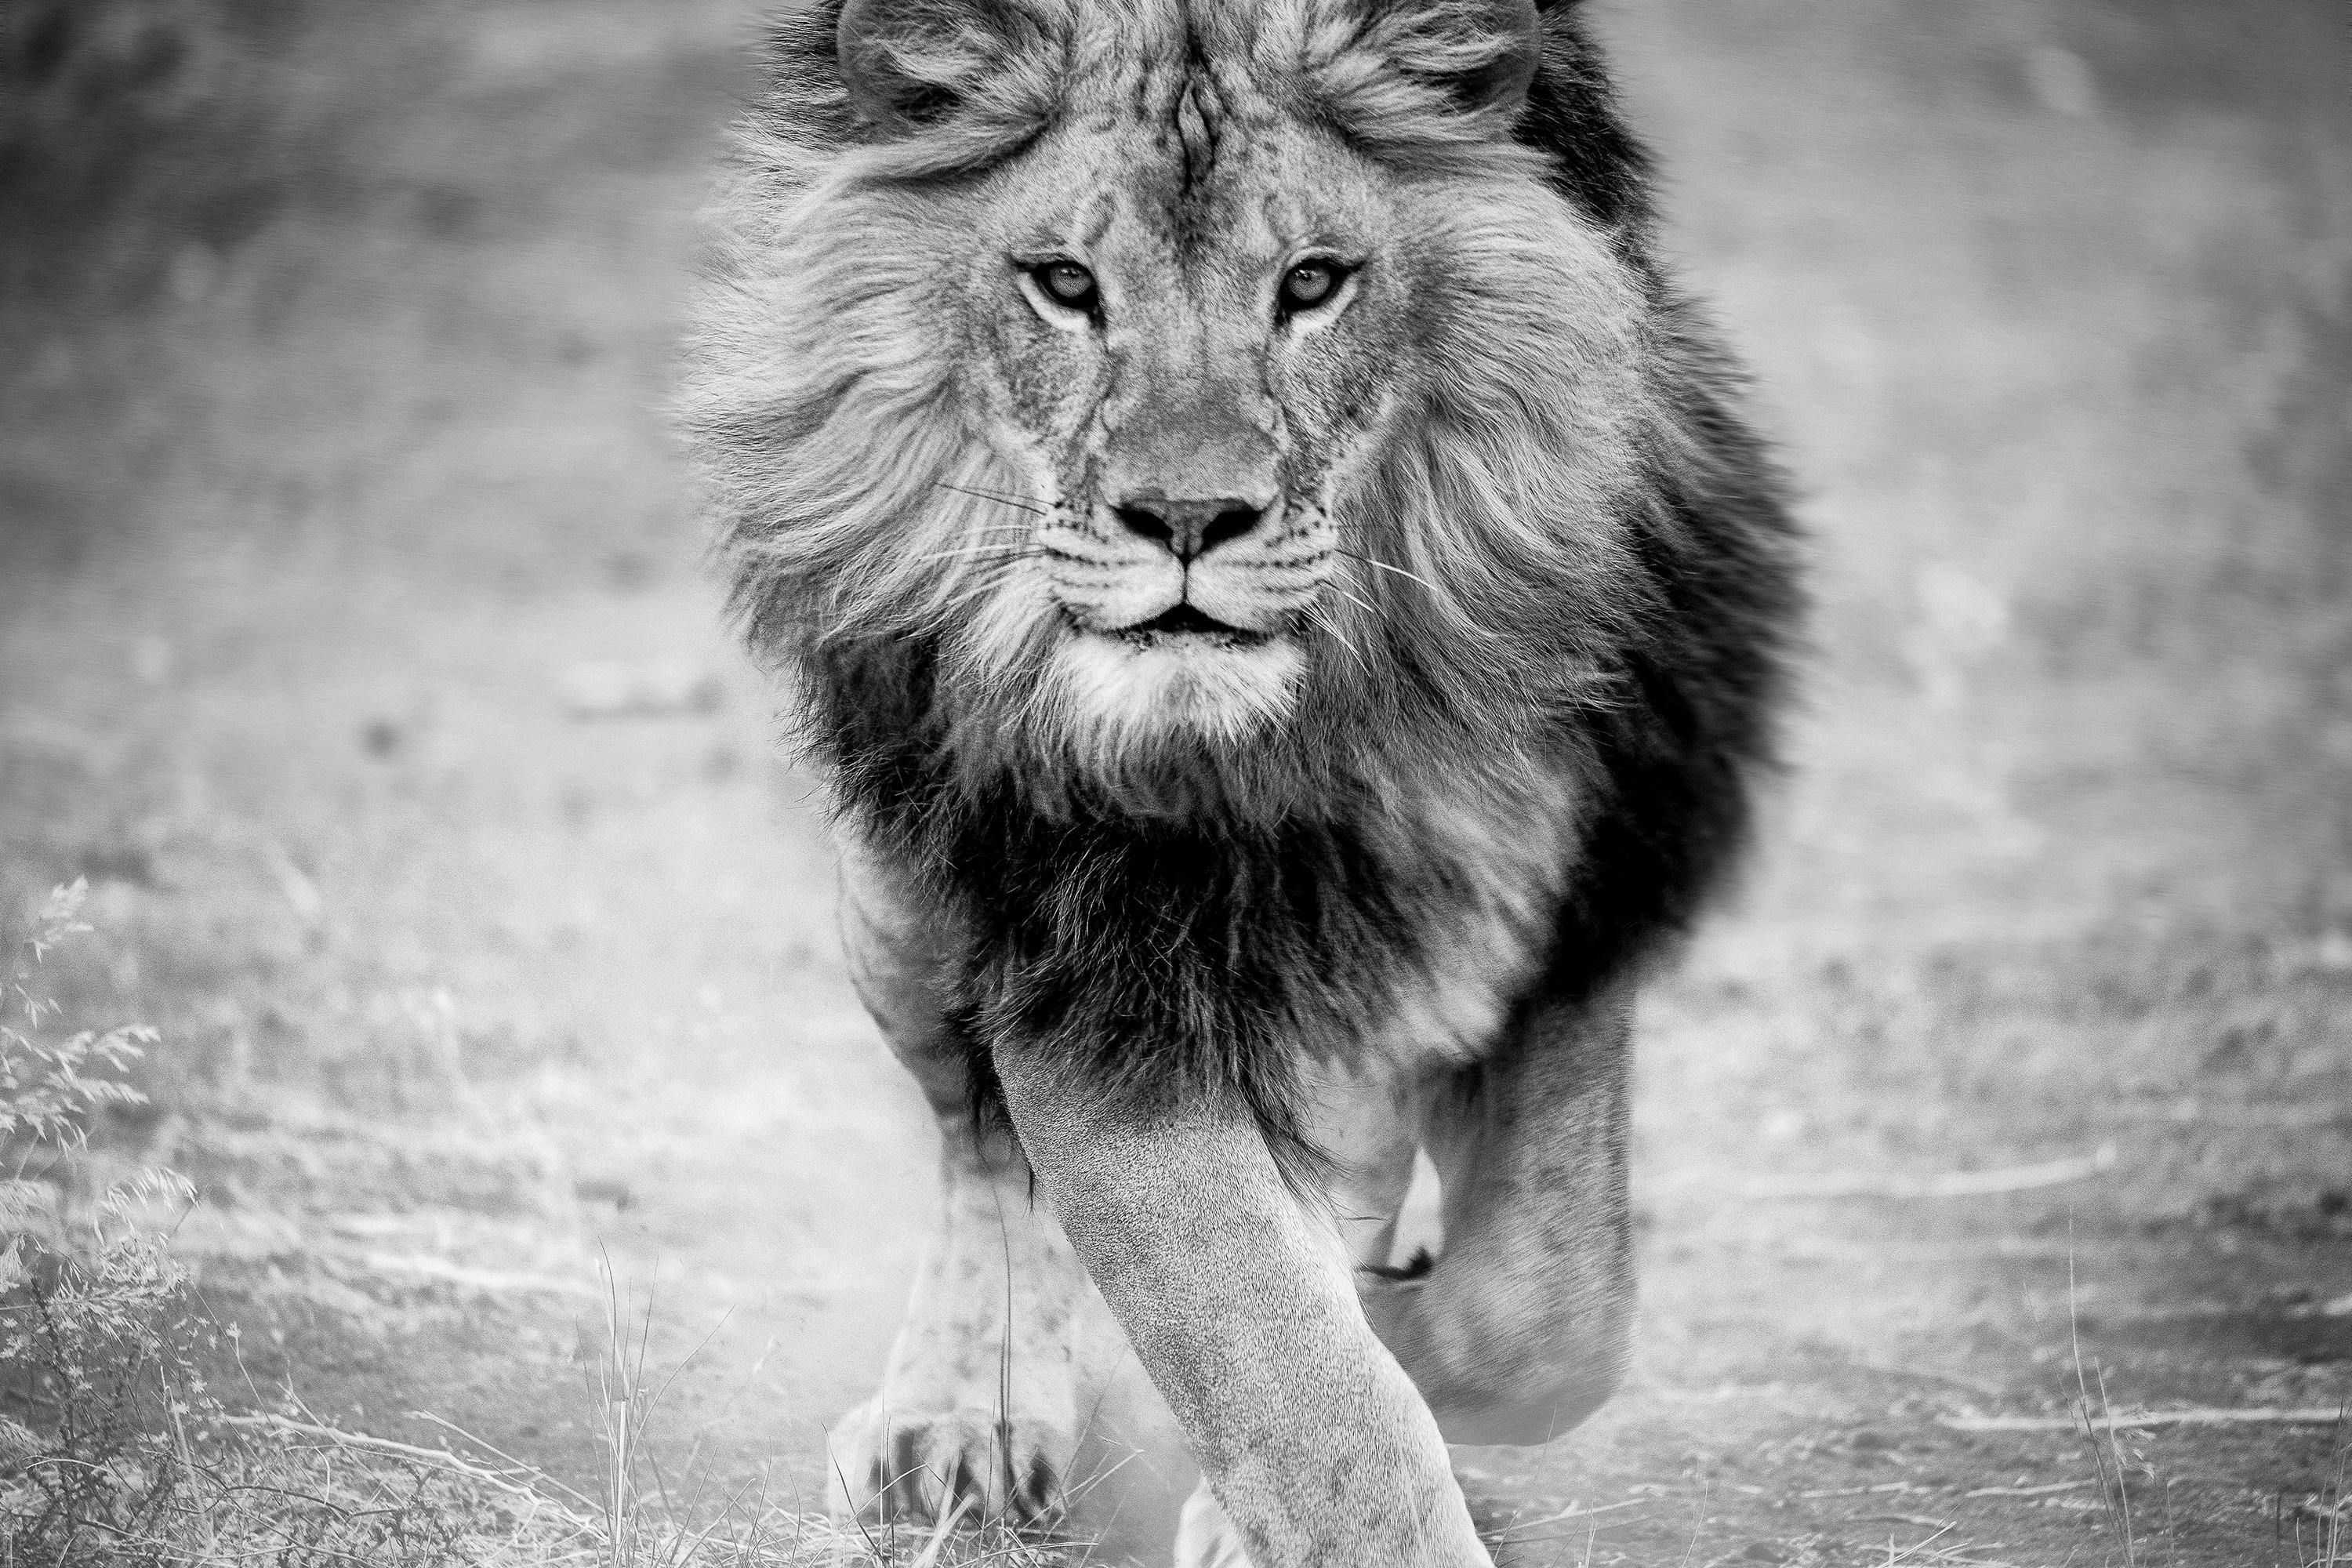 Shane Russeck Black and White Photograph - "Panthera Leo"36x48 Black and White Lion Photography Unsigned Test Print Africa 